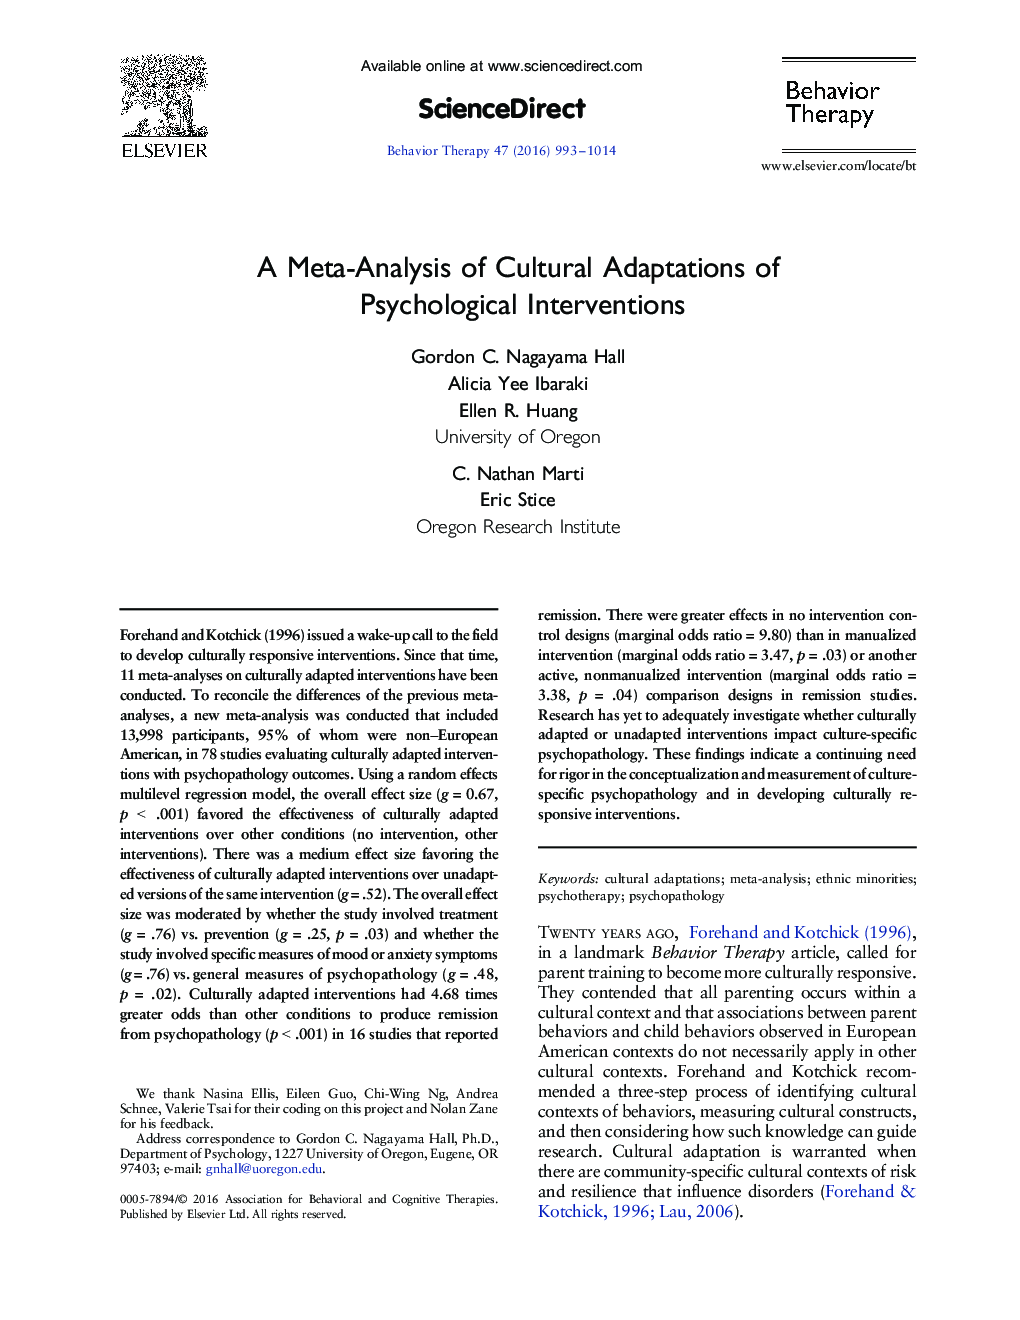 A Meta-Analysis of Cultural Adaptations of Psychological Interventions